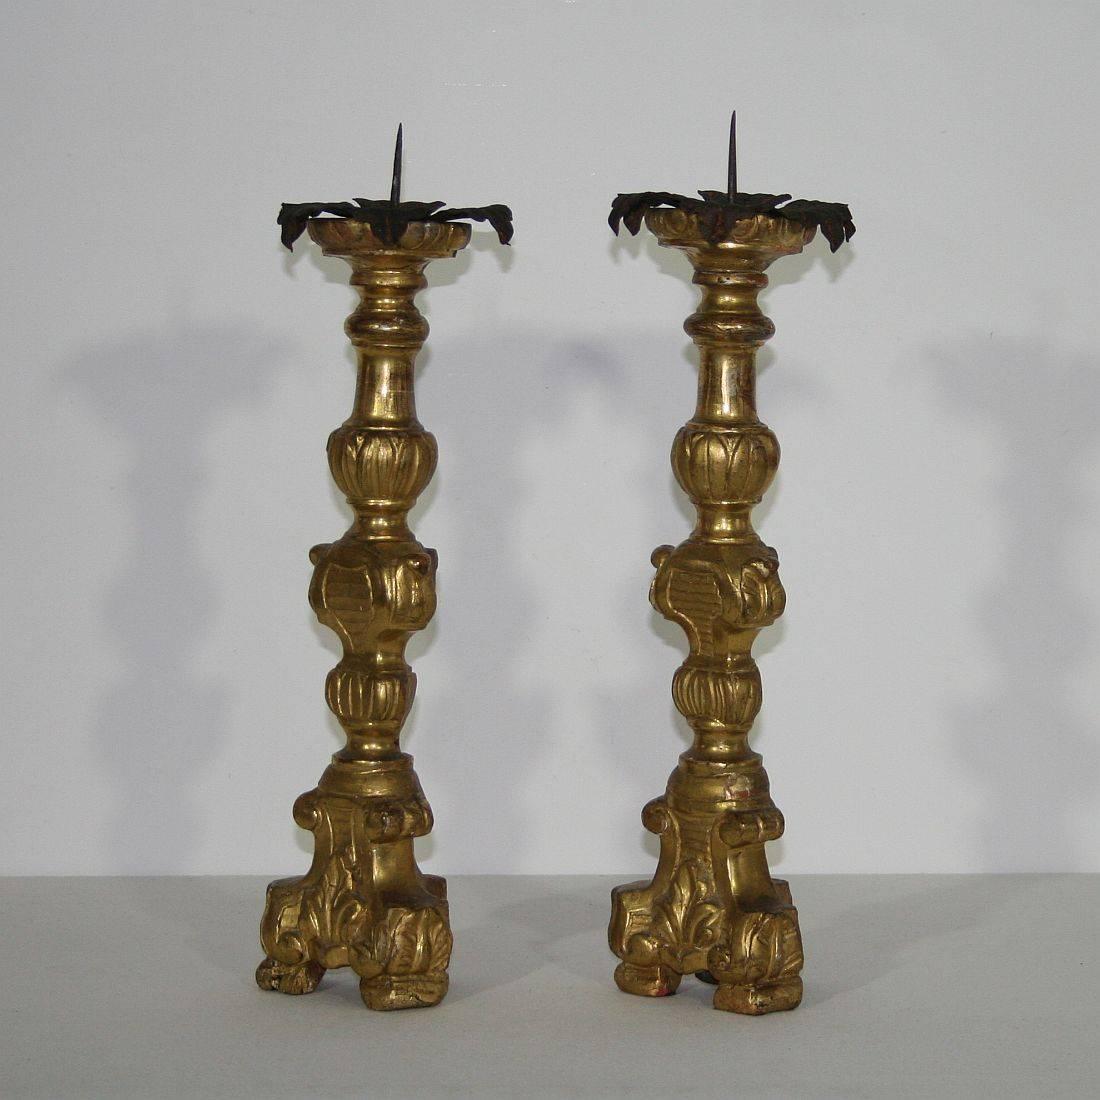 Hand-Carved 18th Century, Italian Baroque Giltwood Candlesticks